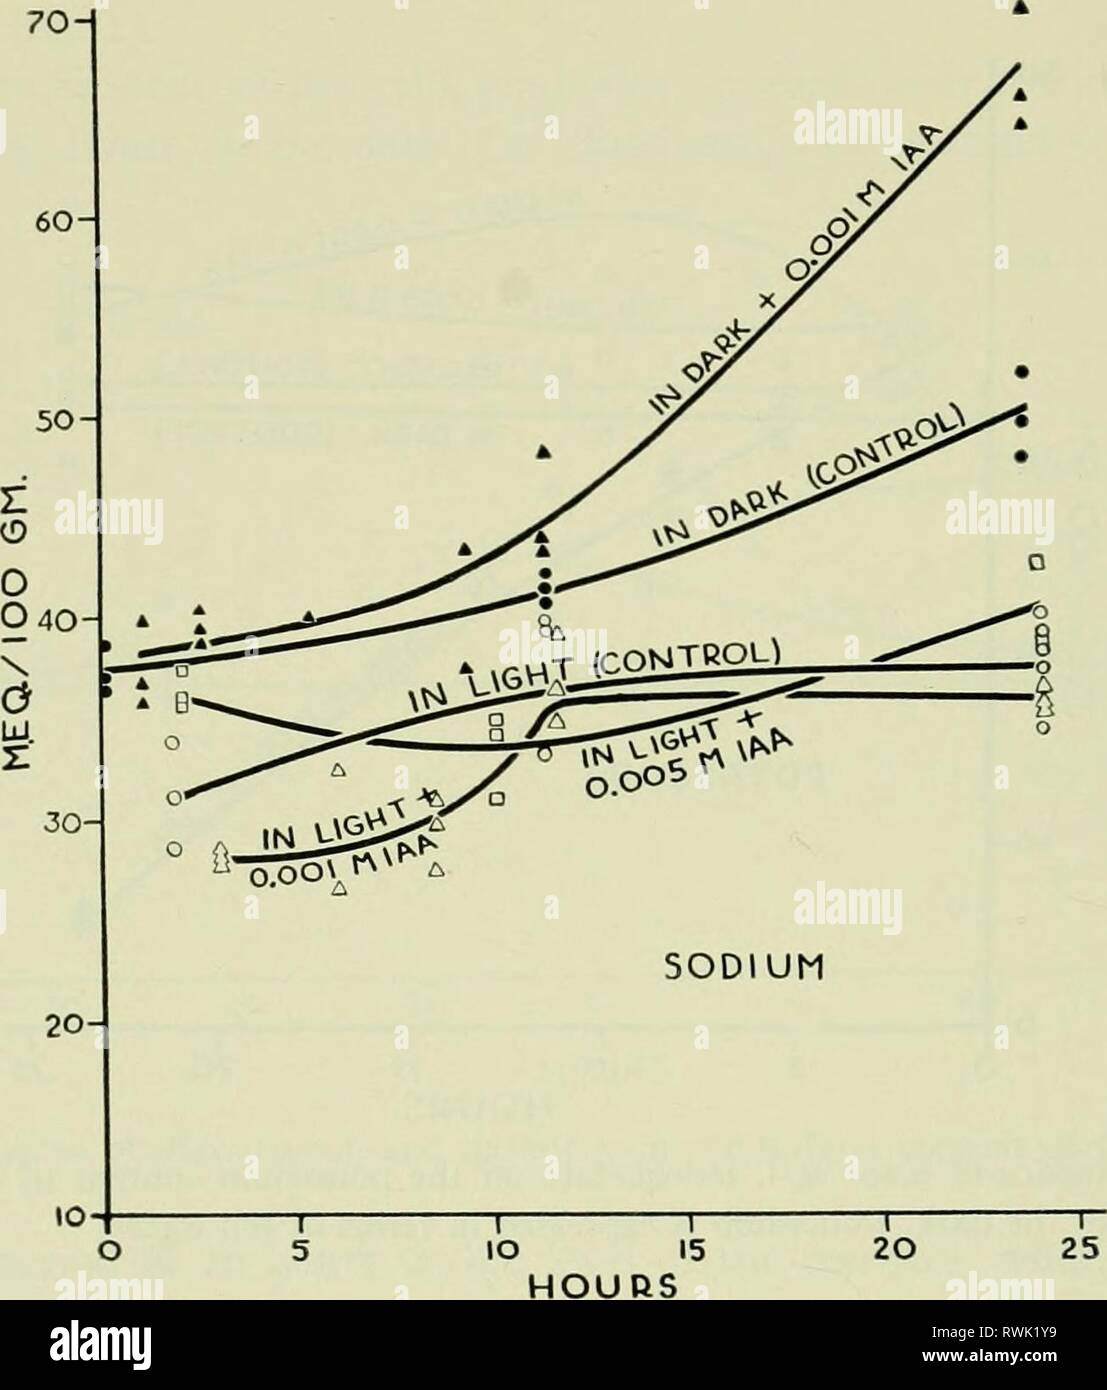 Electrolytes in biological systems, incorporating Electrolytes in biological systems, incorporating papers presented at a symposium at the Marine Biological Laboratory in Woods Hole, Massachusetts, on September 8, 1954 electrolytesinbi00shan Year: 1955  44 ELECTROLYTES IN BIOLOGICAL SYSTEMS what reduced compared to the controls (fig. 4). Light also prevents an increase in sodium when the inhibitor concentration is raised to 0.005 m/1. Influence of iodoacetate in the light and the dark: Valonia. The presence of the inhibitor at a concentration of o.ooi m/1. causes no significant change in the p Stock Photo